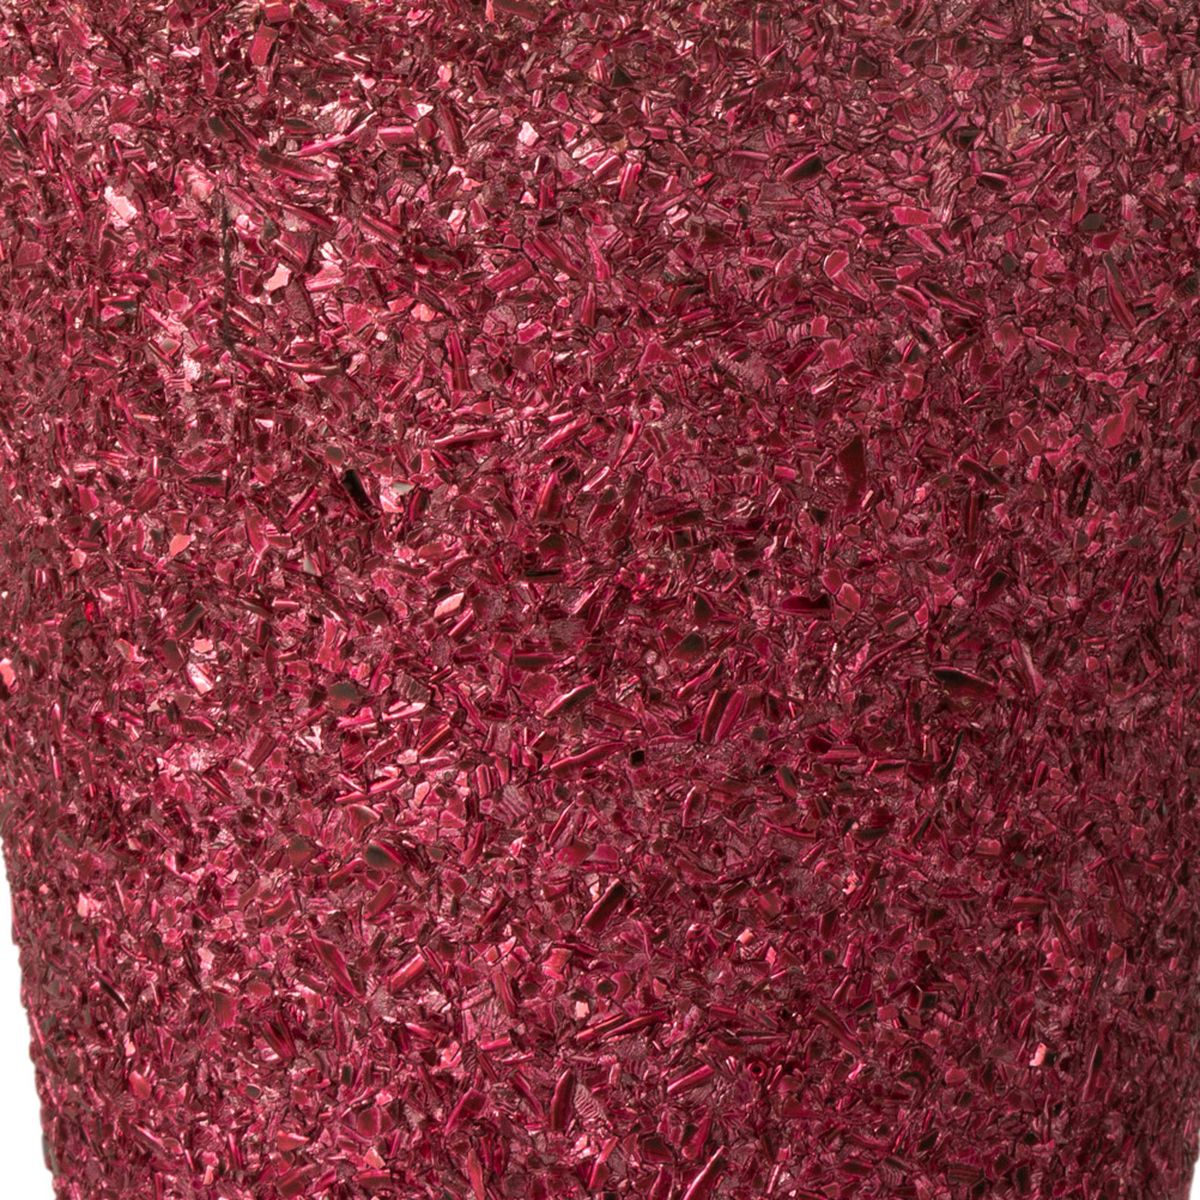 Glittery pink glass pot cover